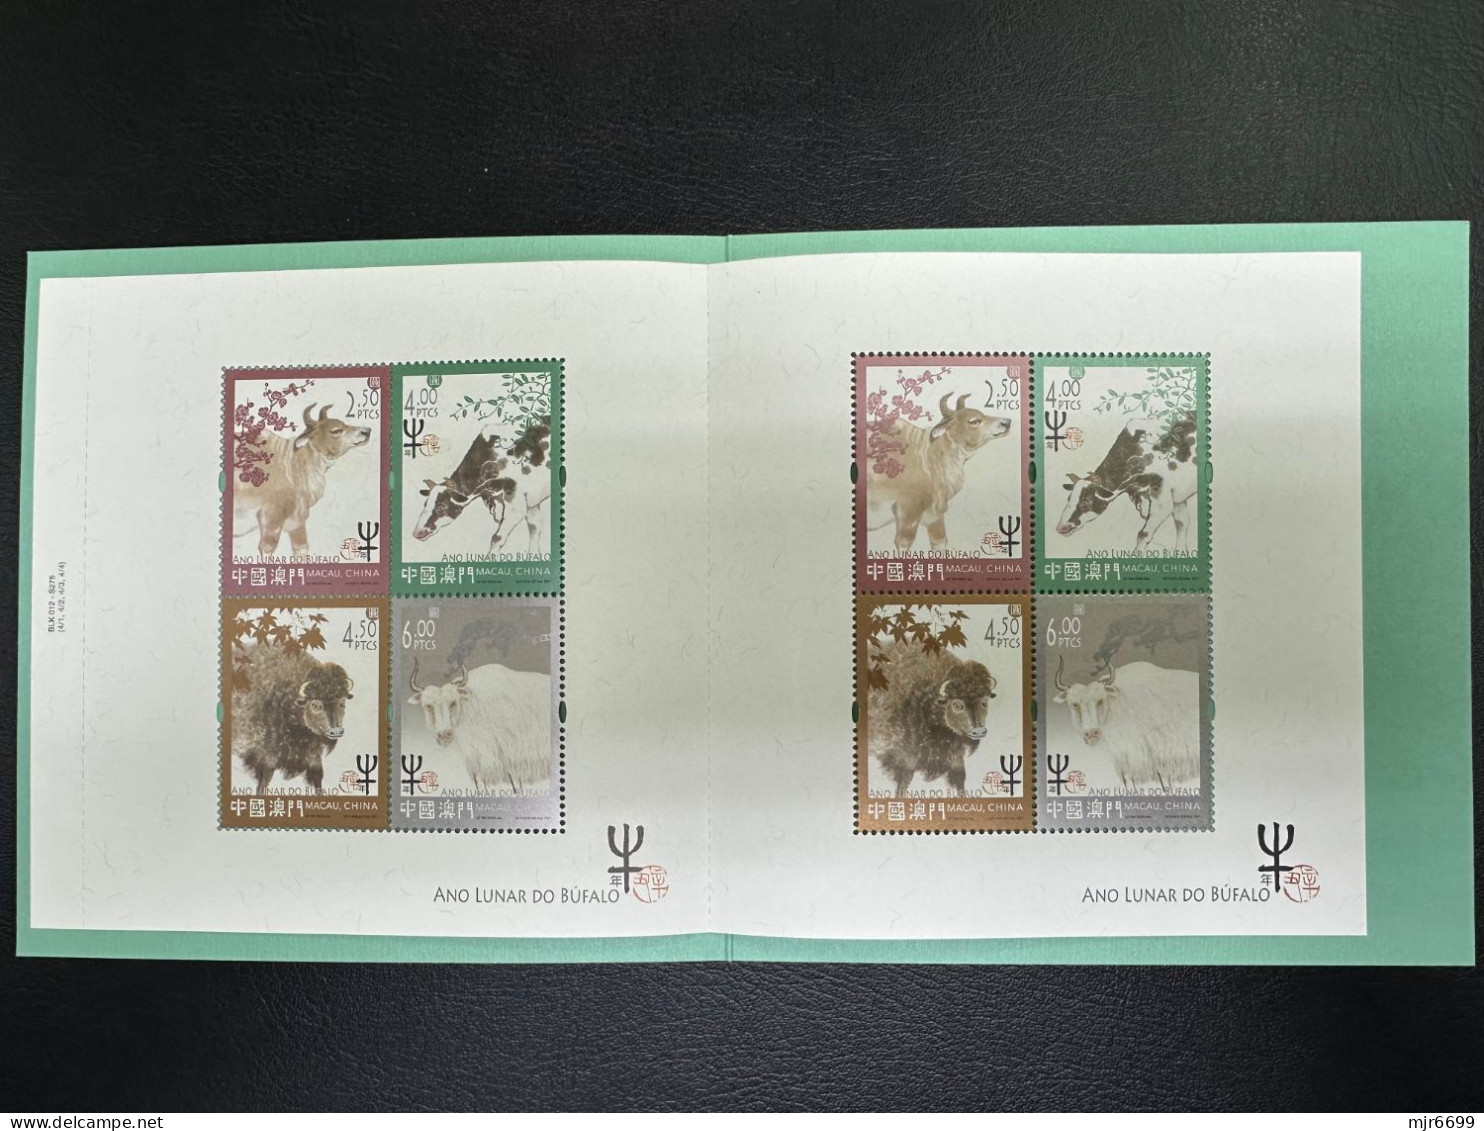 MACAU - 2021 YEAR OF THE OX BOOKLET - Booklets